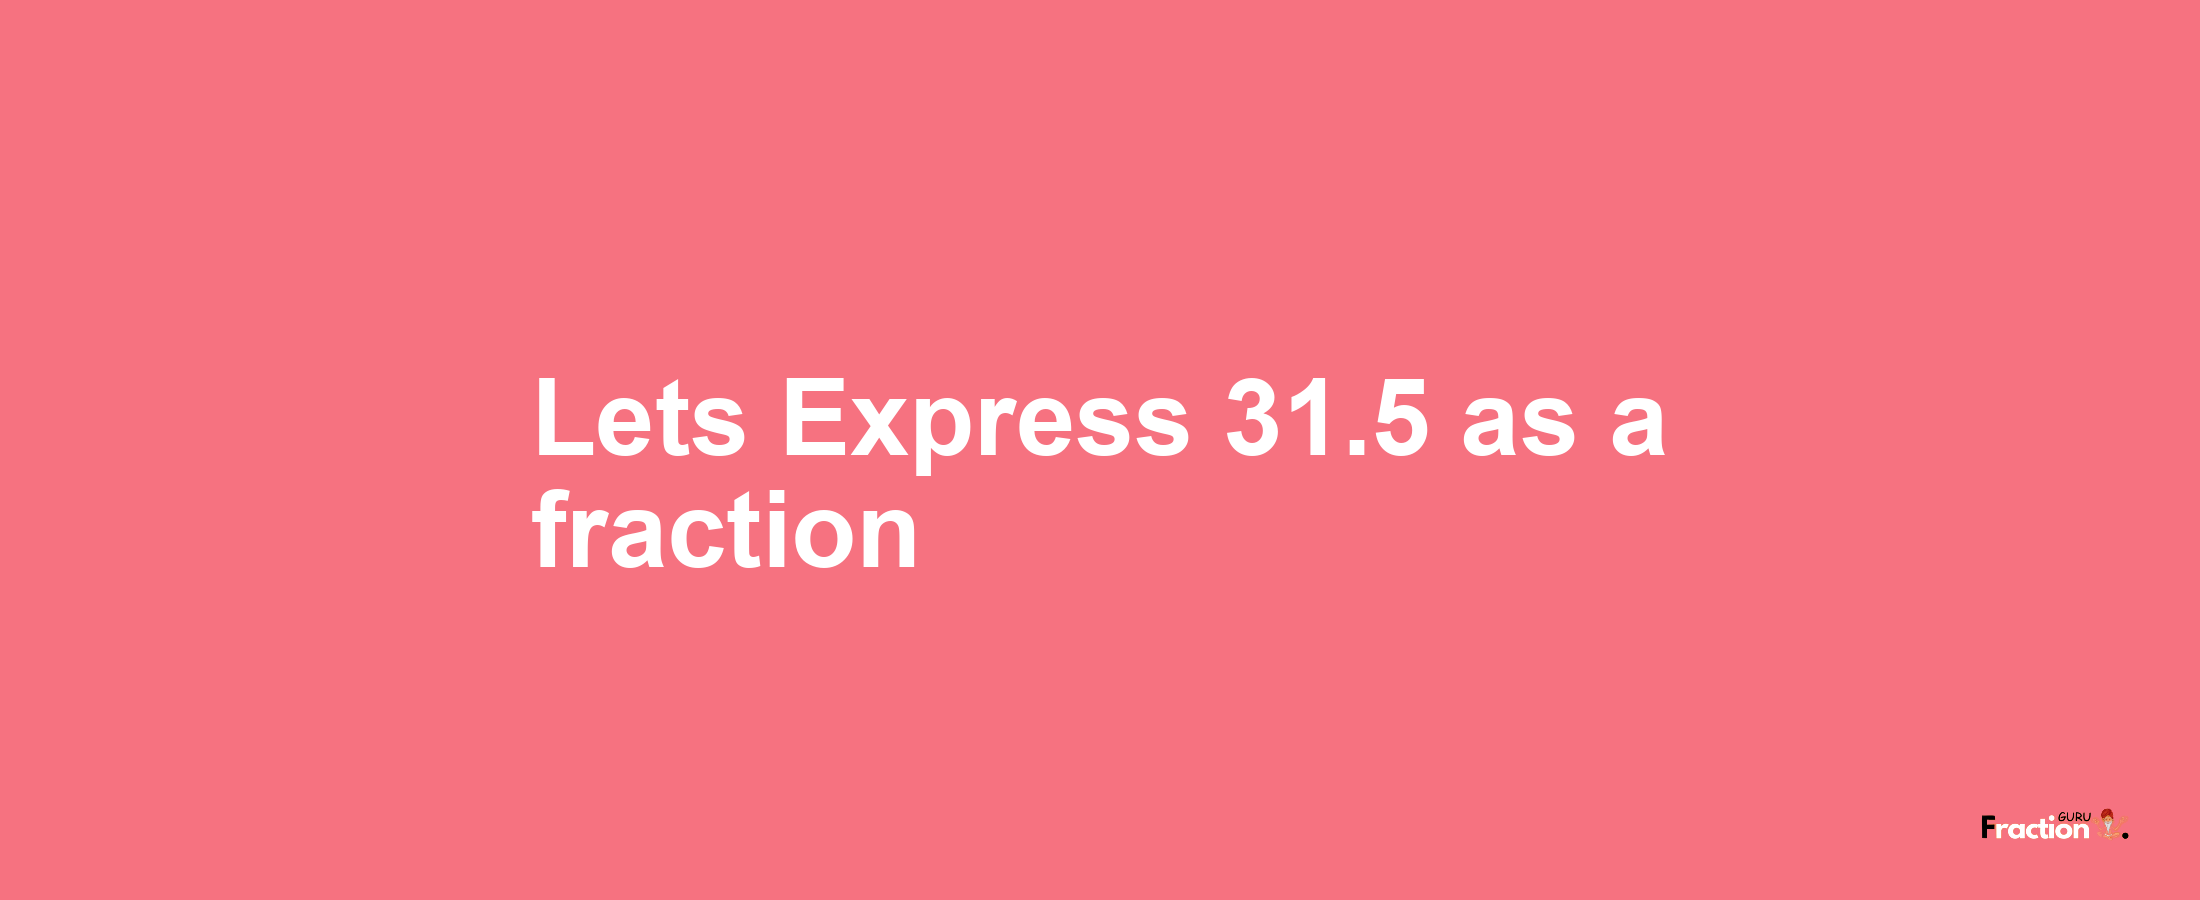 Lets Express 31.5 as afraction